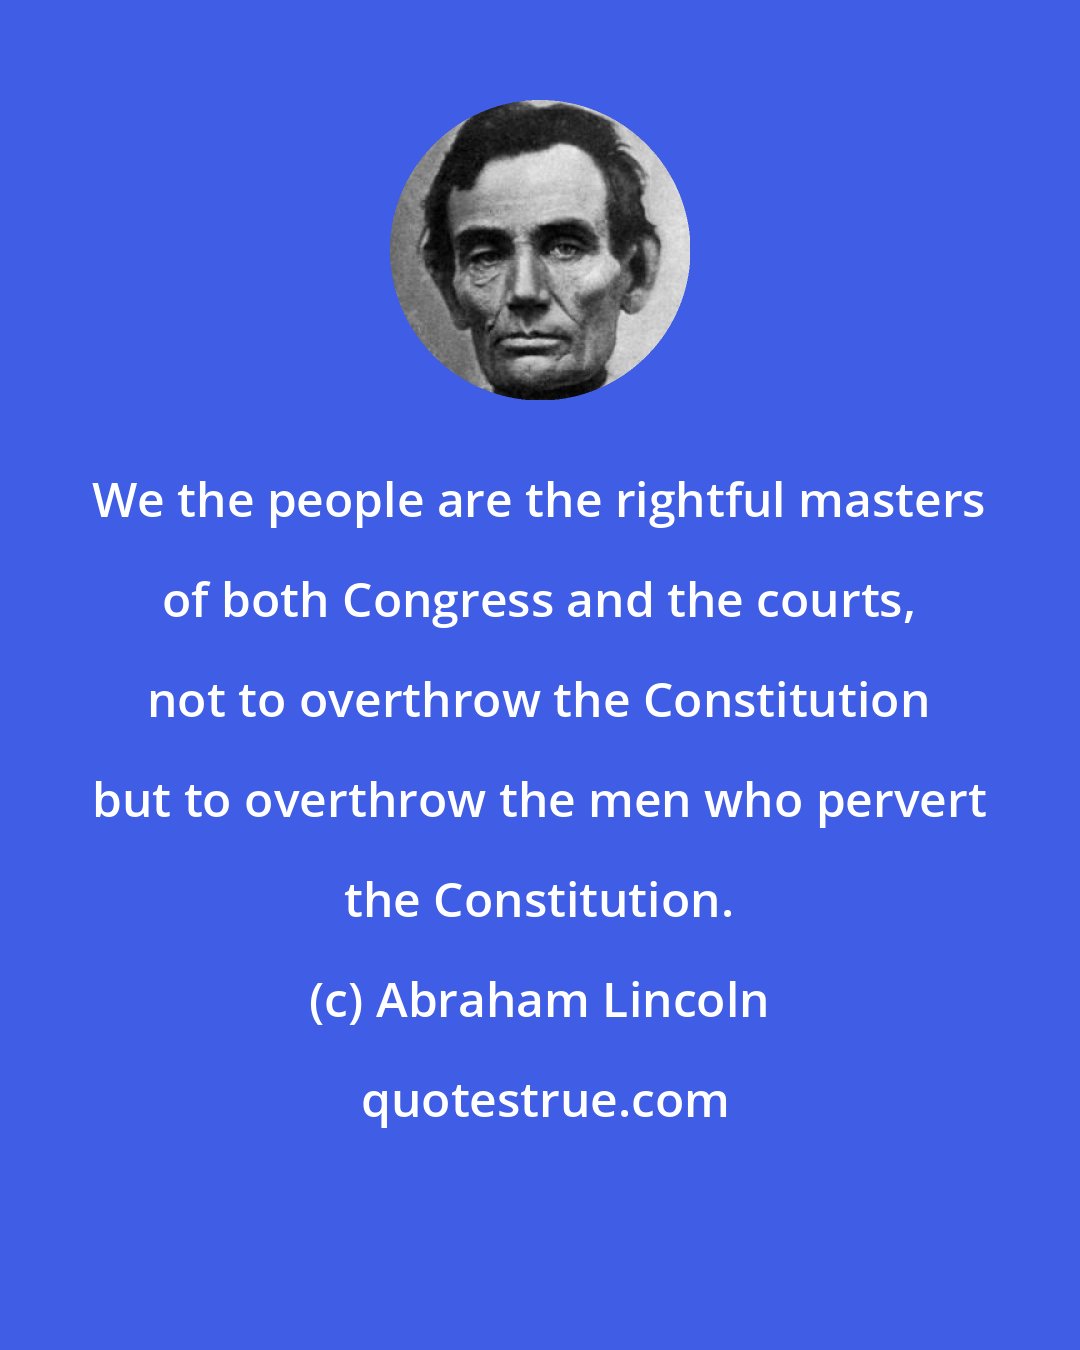 Abraham Lincoln: We the people are the rightful masters of both Congress and the courts, not to overthrow the Constitution but to overthrow the men who pervert the Constitution.